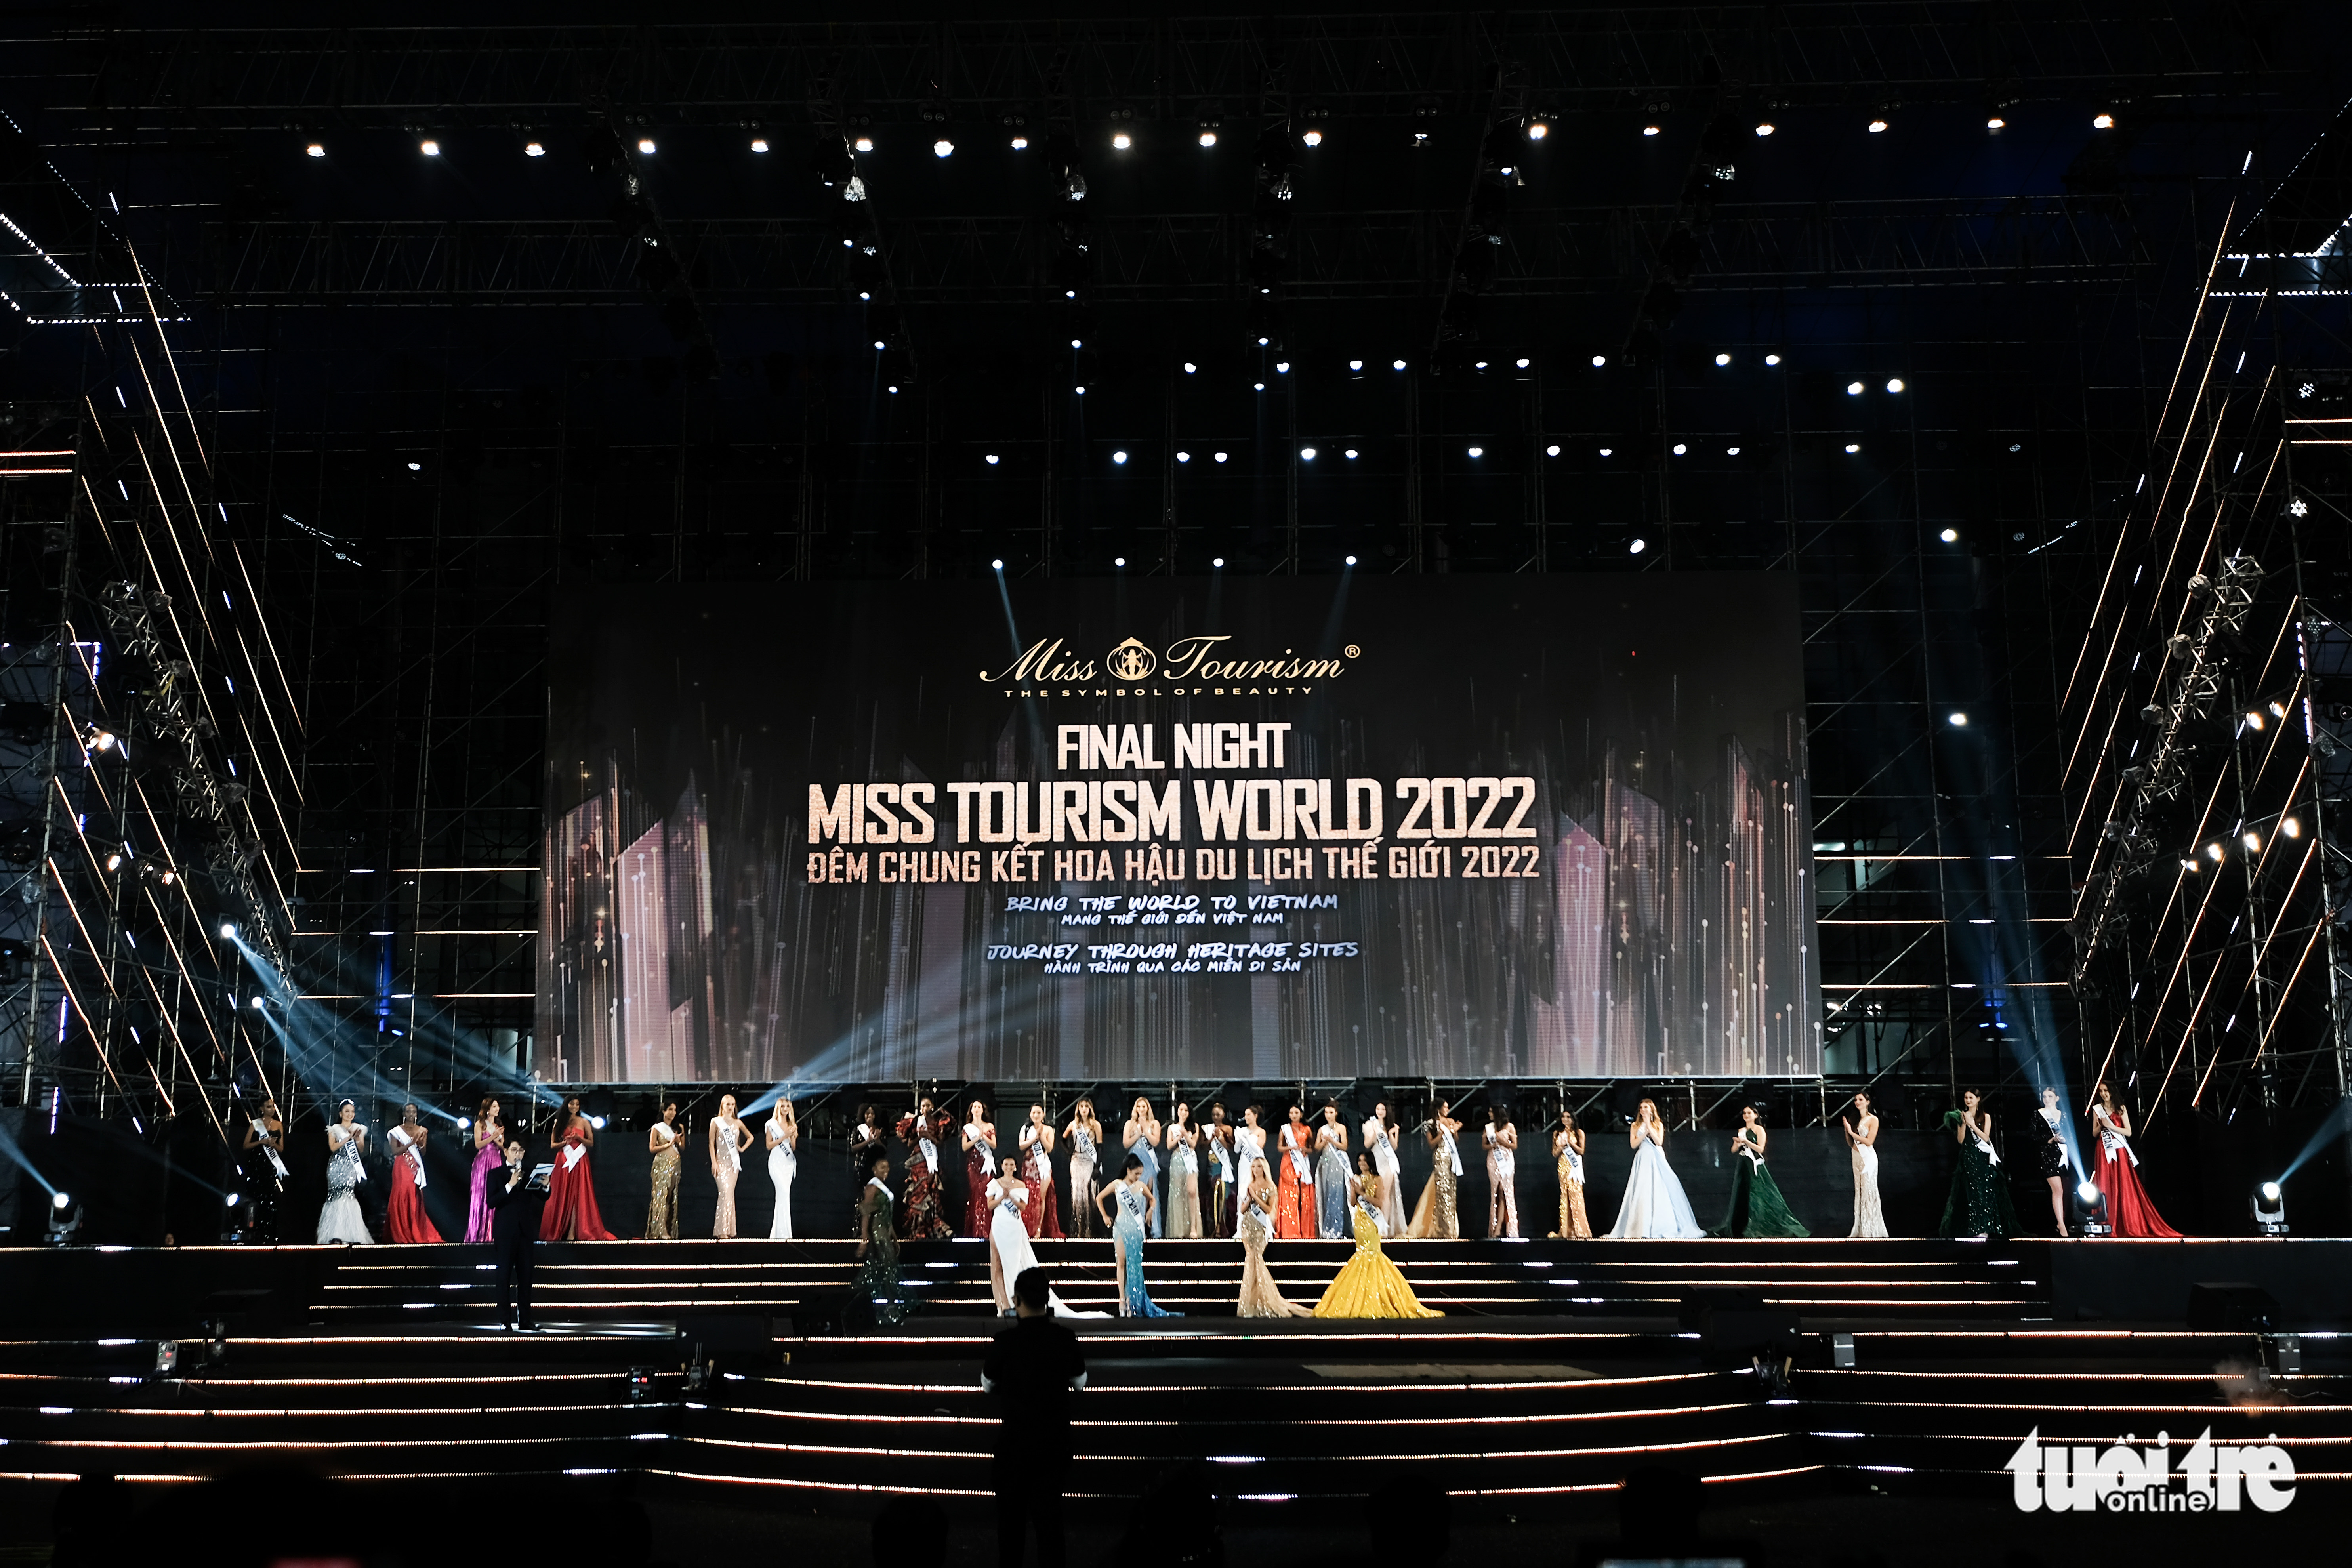 The finale of Miss Tourism World 2022 in Vinh Phuc Province, Vietnam, December 10, 2022. Photo: Mai Thuong / Tuoi Tre